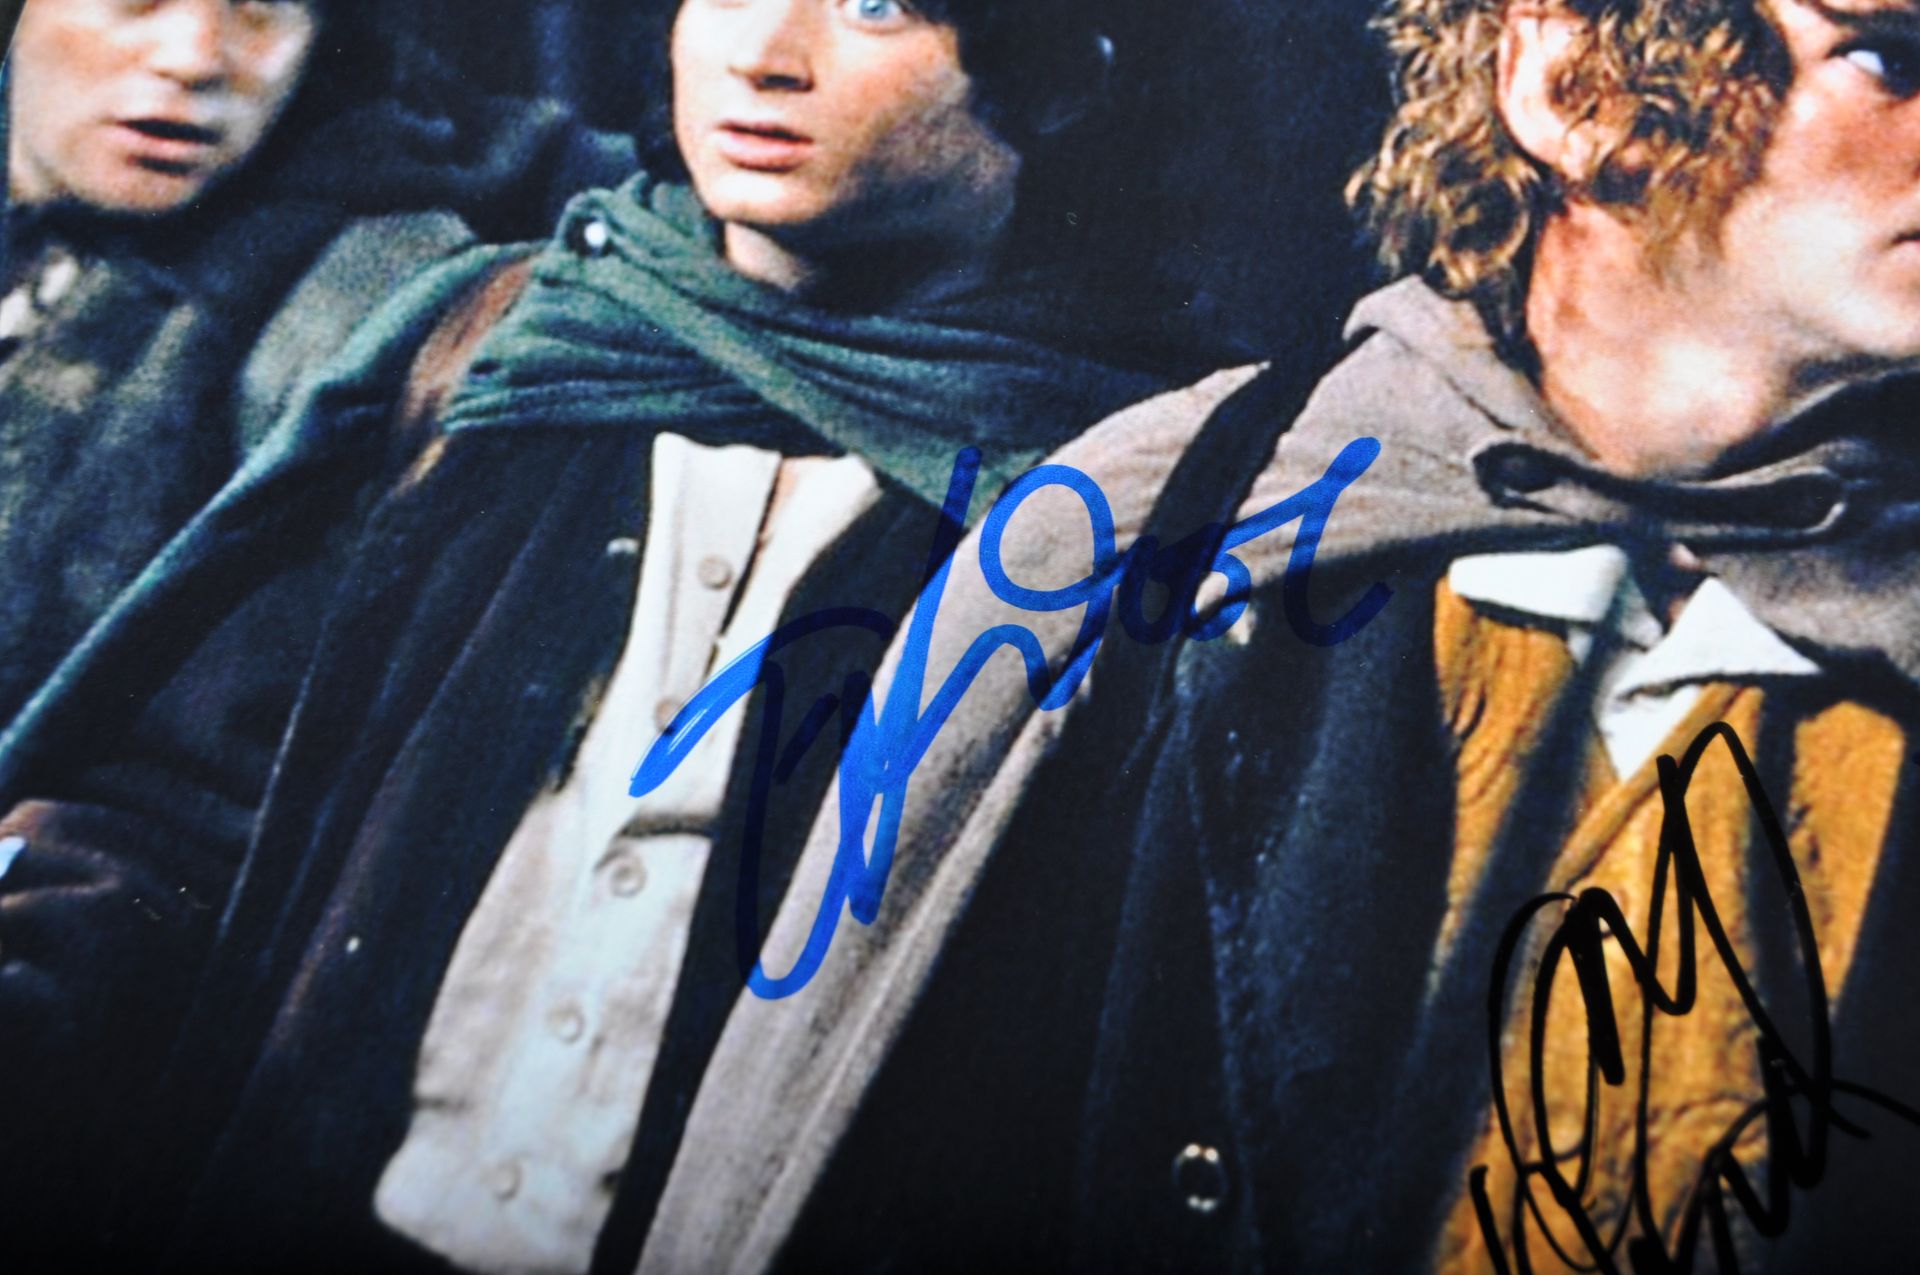 LORD OF THE RINGS - CAST MULTI-SIGNED - 8X10 SIGNED AUTOGRAPH - Image 2 of 3